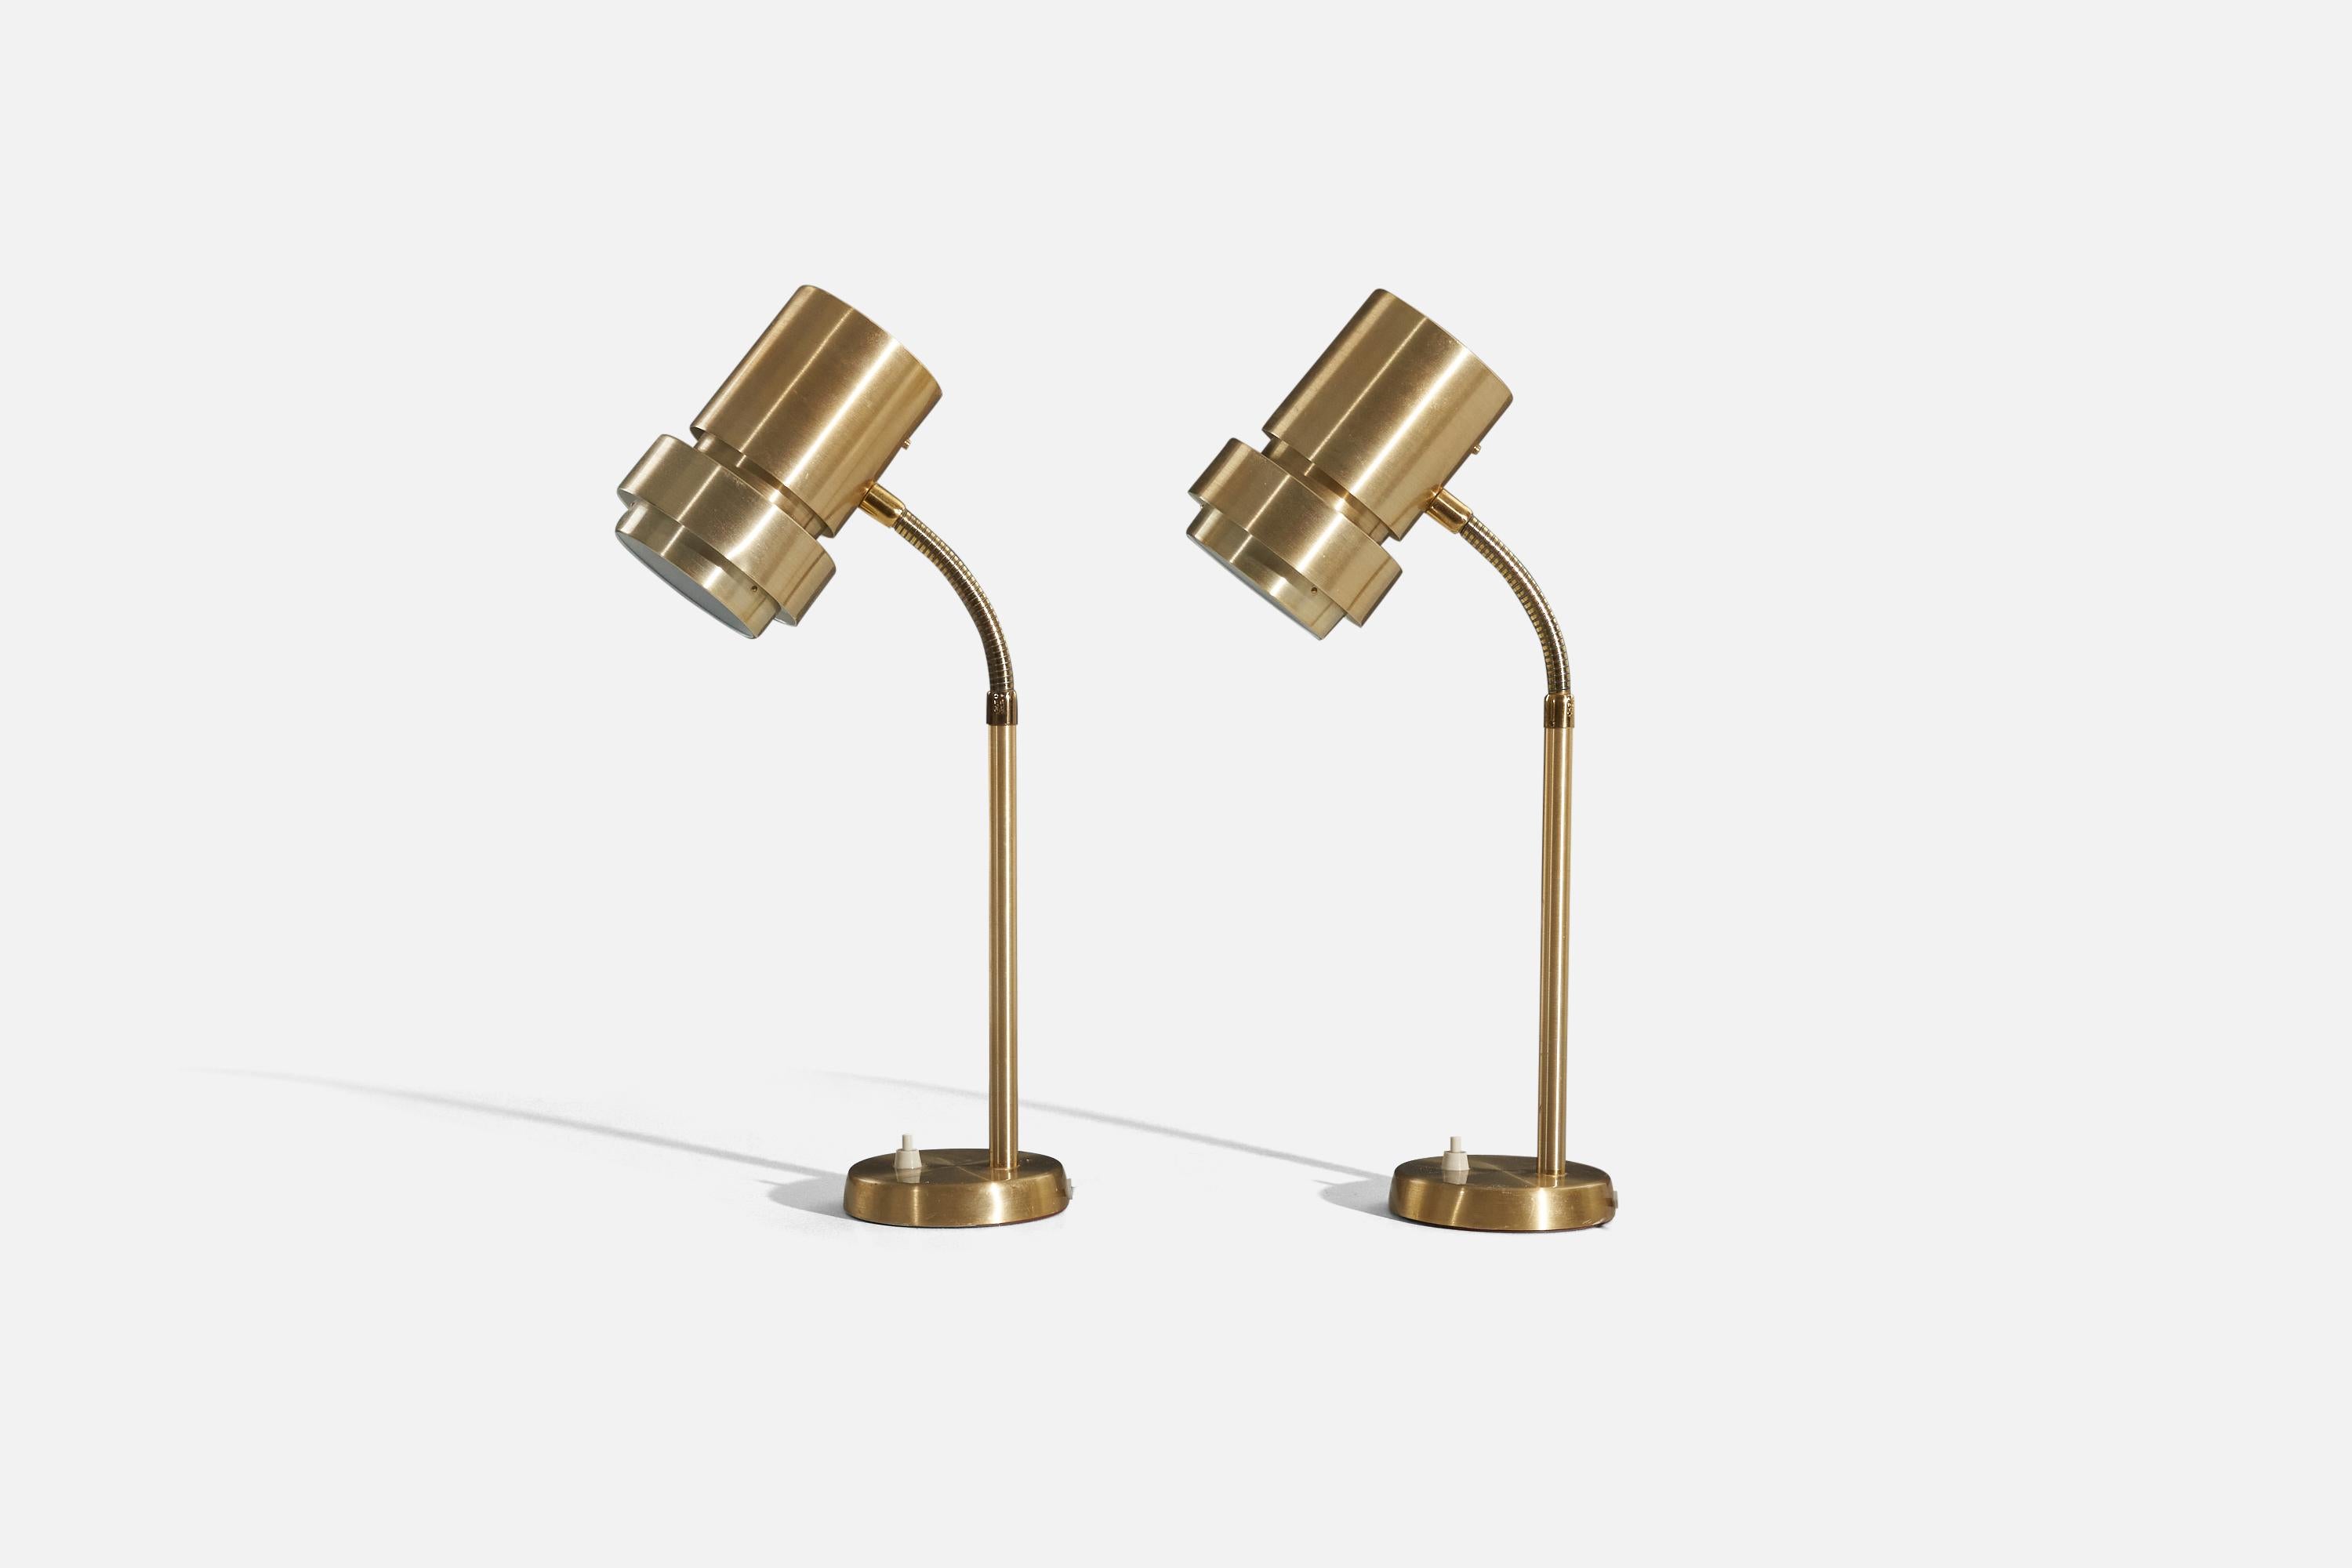 A pair of brass table lamps designed and produced by a Swedish designer, Sweden, c. 1960s.

